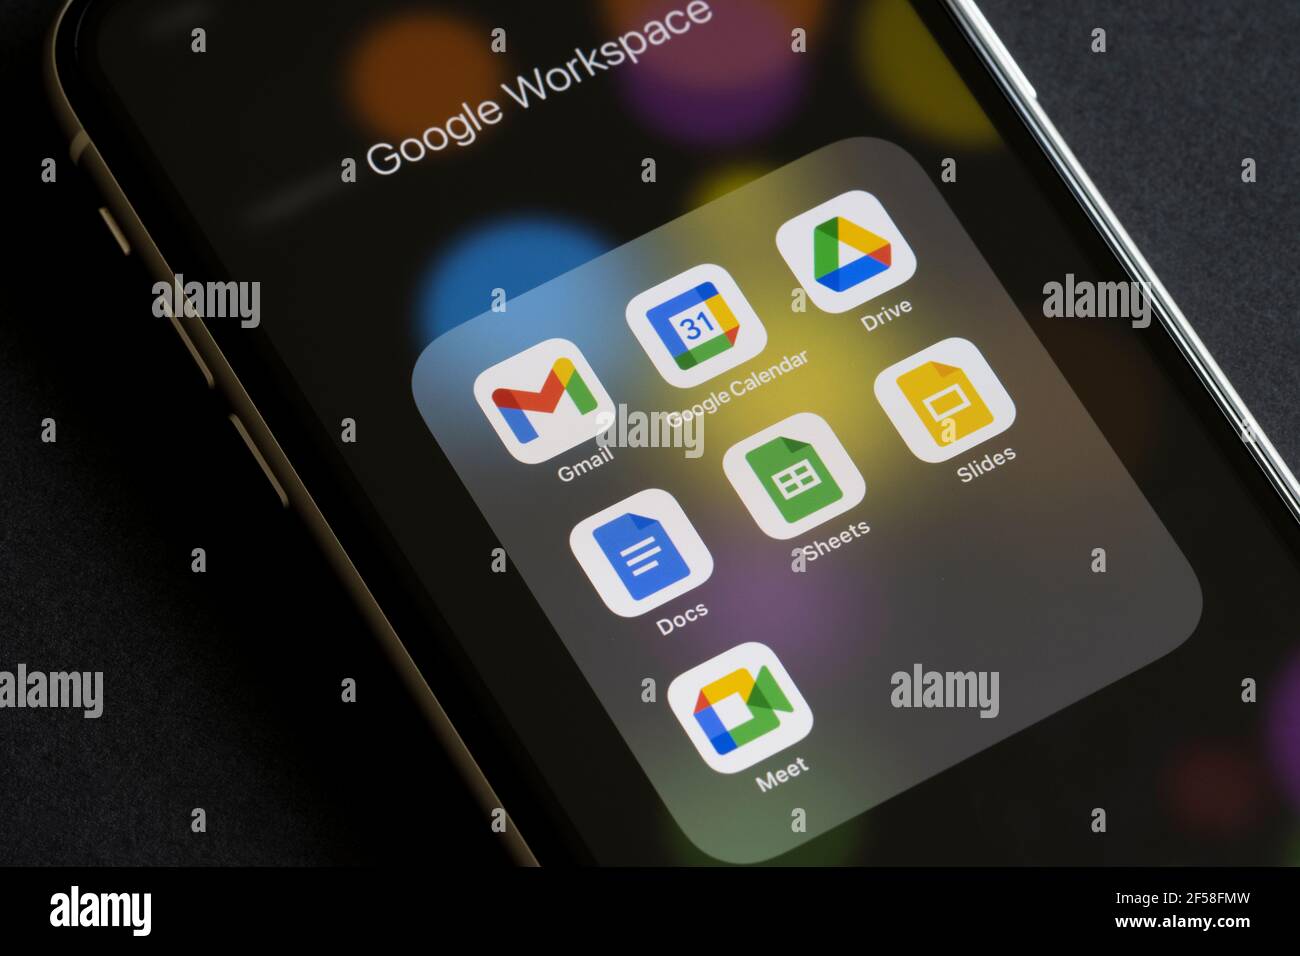 The core apps included in Google Workspace (formerly G Suite) are seen on an iPhone - Gmail, Calendar, Drive, Docs, Sheets, Slides, and Meet. Stock Photo